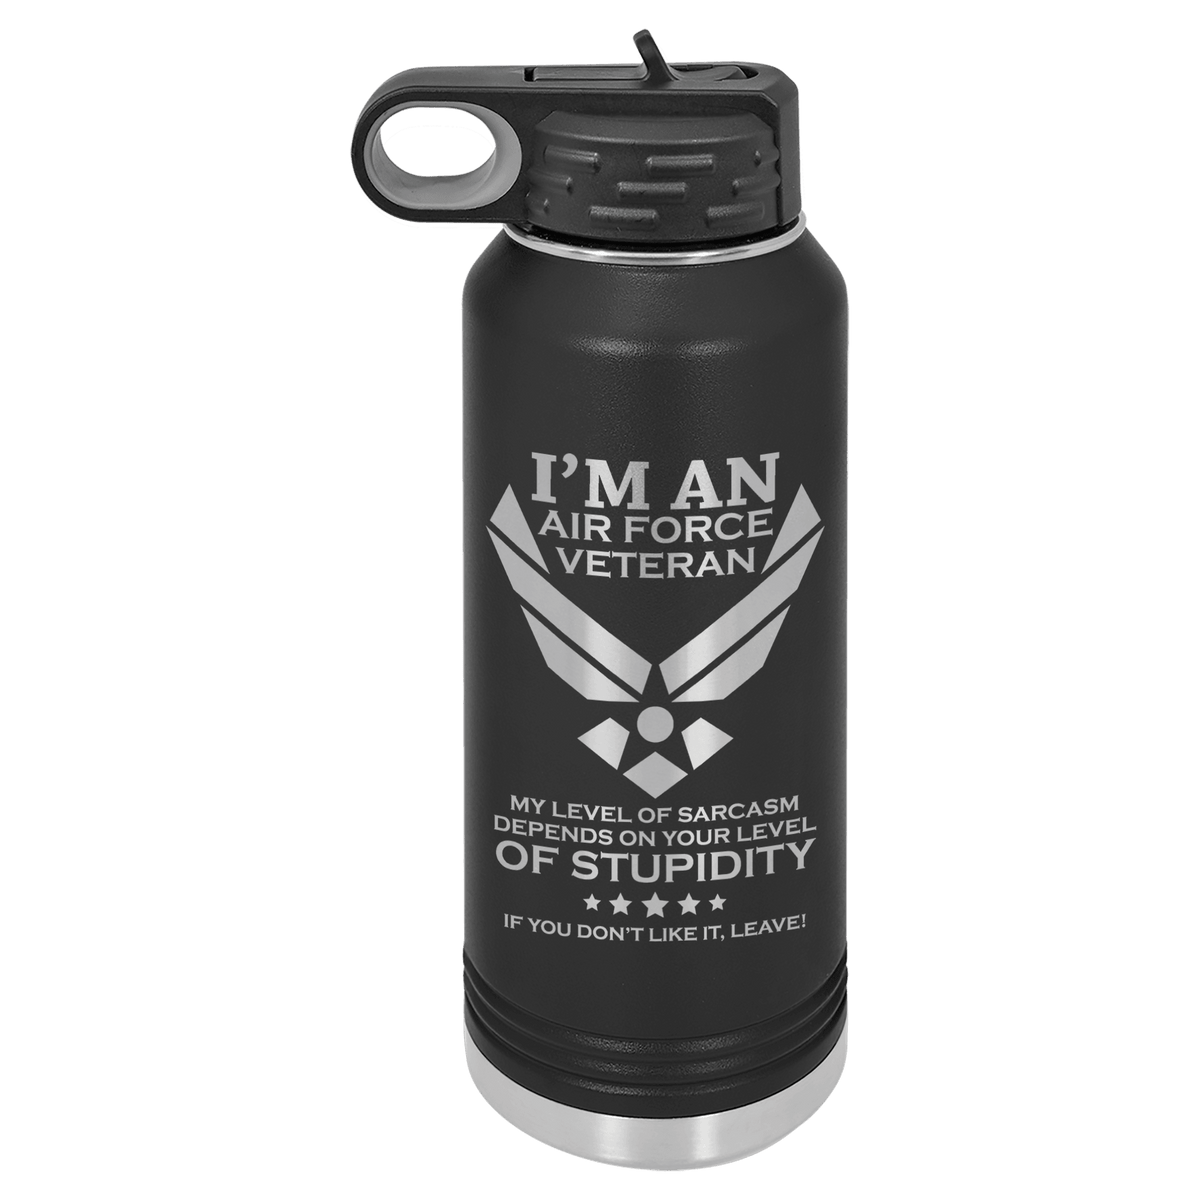 Designs by MyUtopia Shout Out:I'm an Air Force Veteran - 32 oz Polar Camel Water Bottle - Stainless Steel,32oz / Black,Polar Camel - 32oz Water Bottle